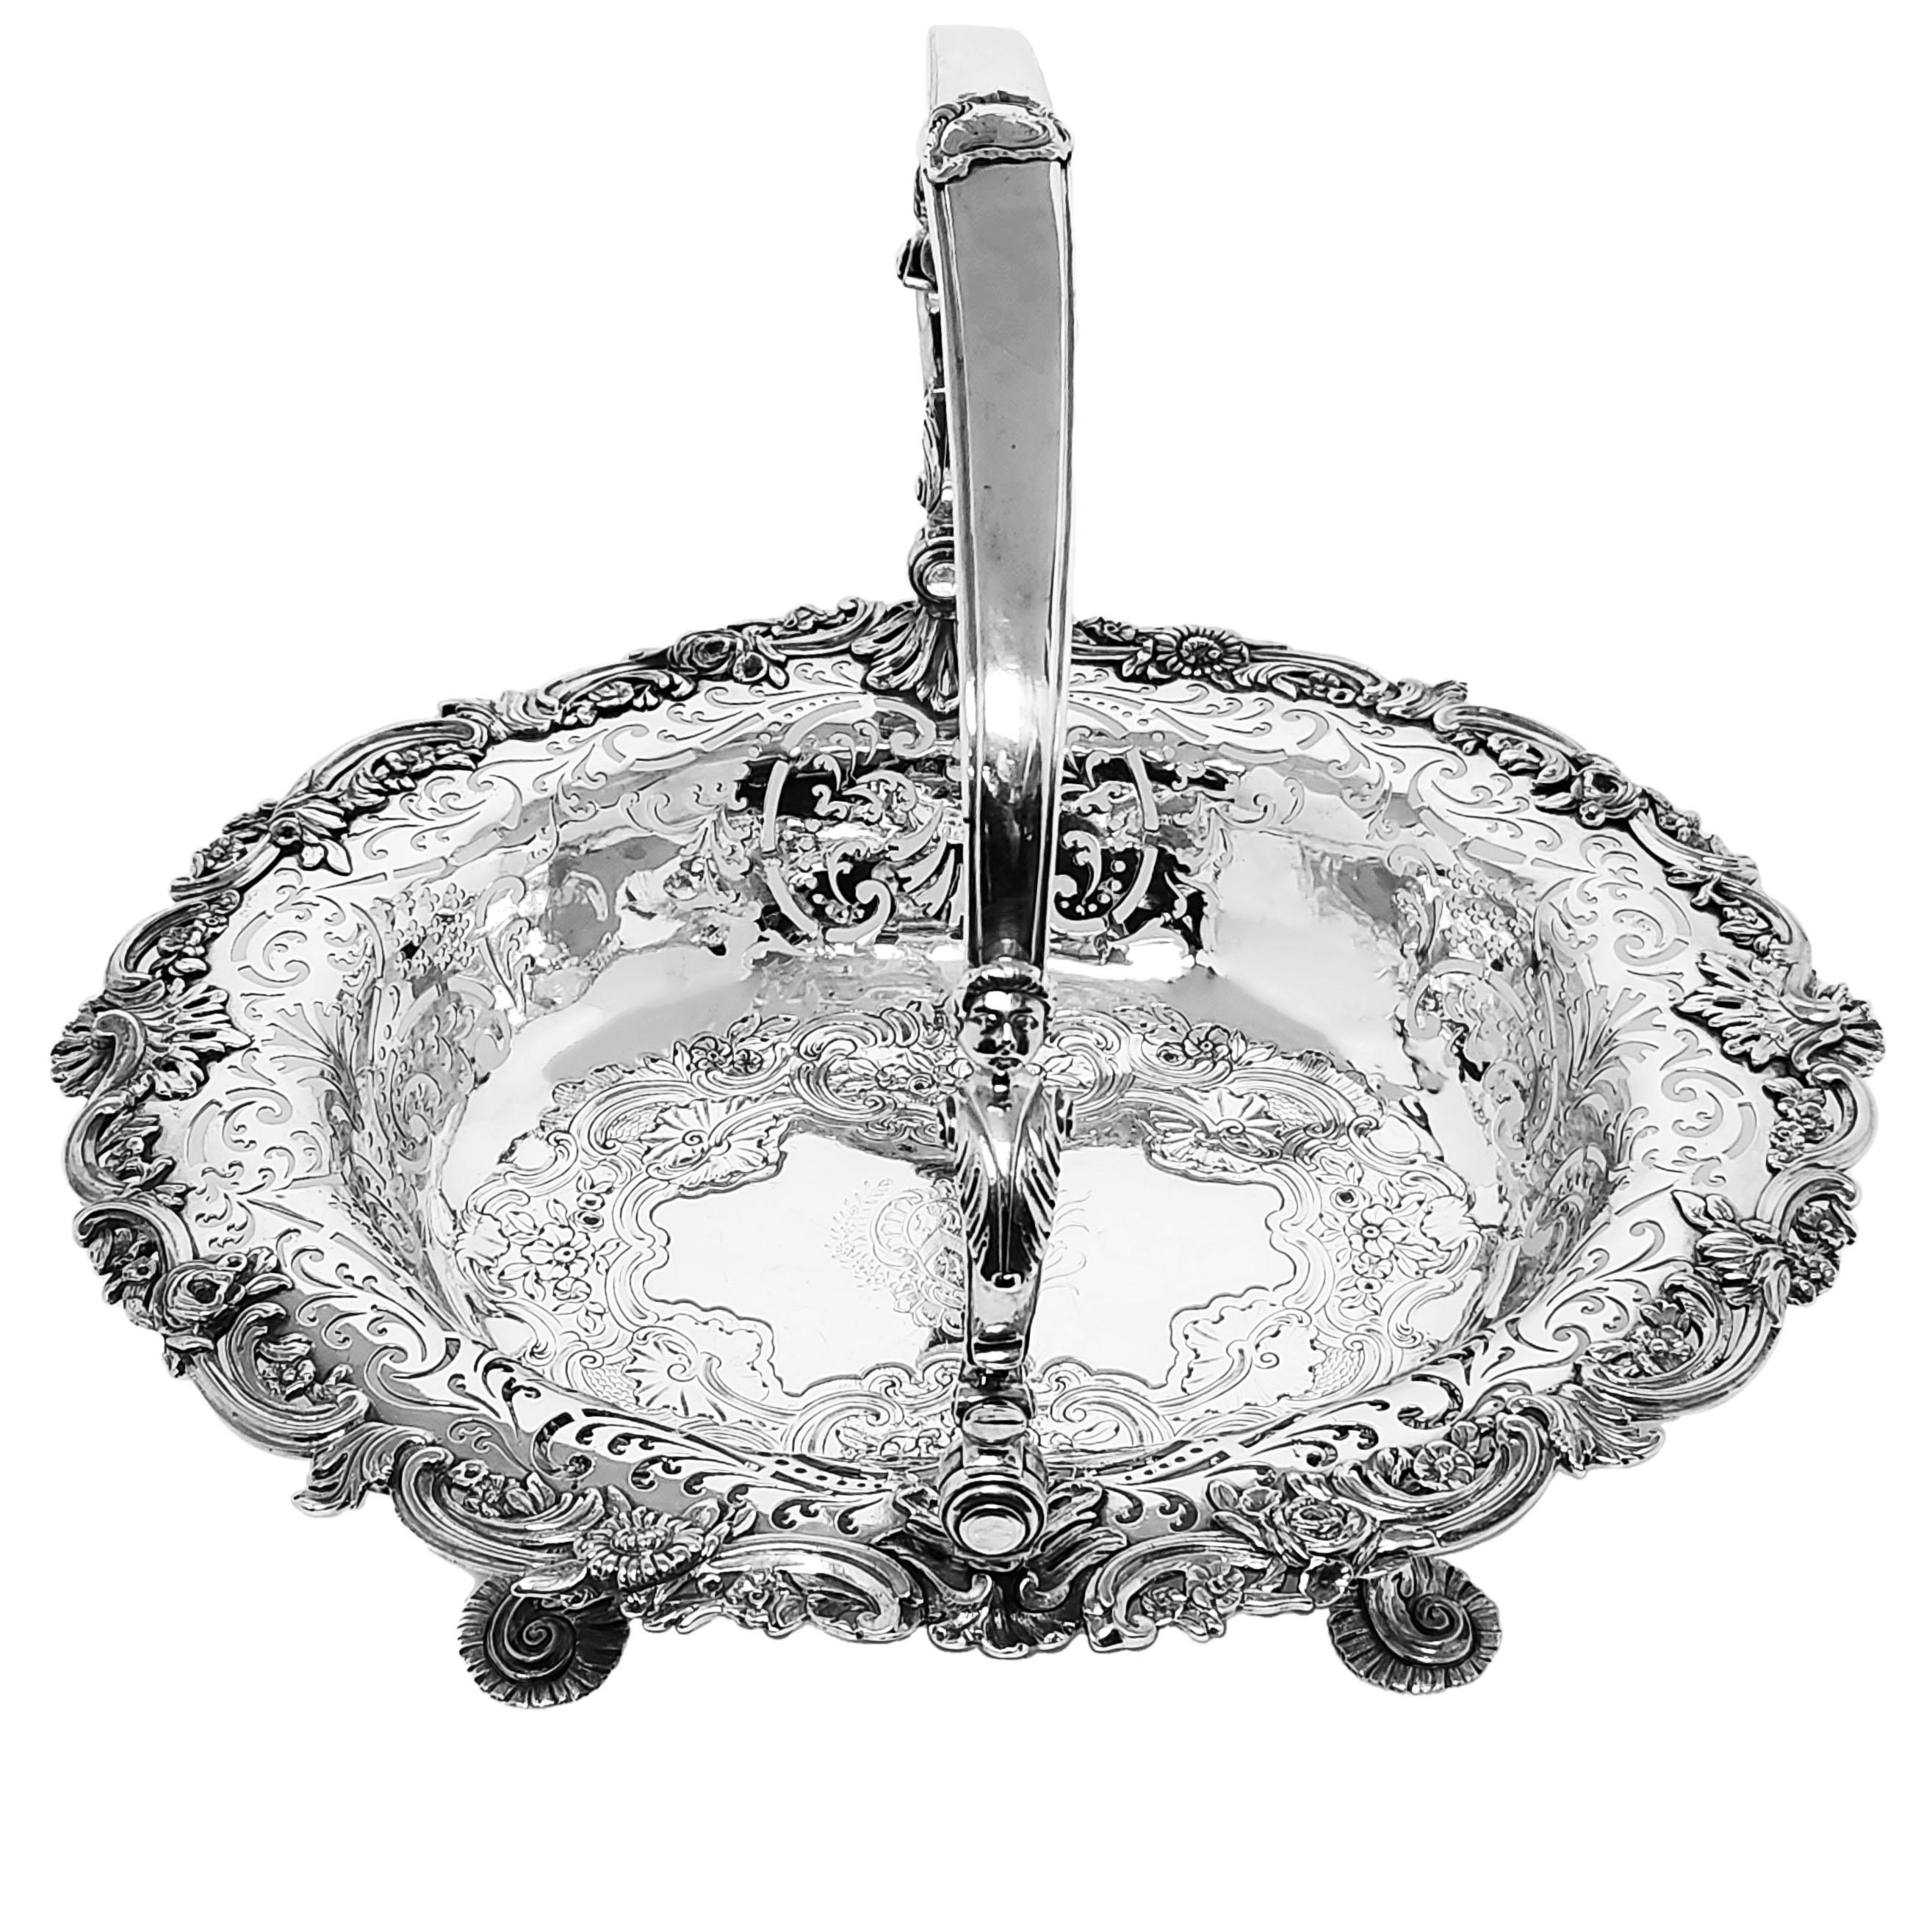 A magnificent Antique George II Sterling Silver Swing Handled Basket with an oval form standing on four shaped feet with bacchanalian faces at the capital of each foot. The Basket has an ornate chased floral & scroll pattern border and an elegant